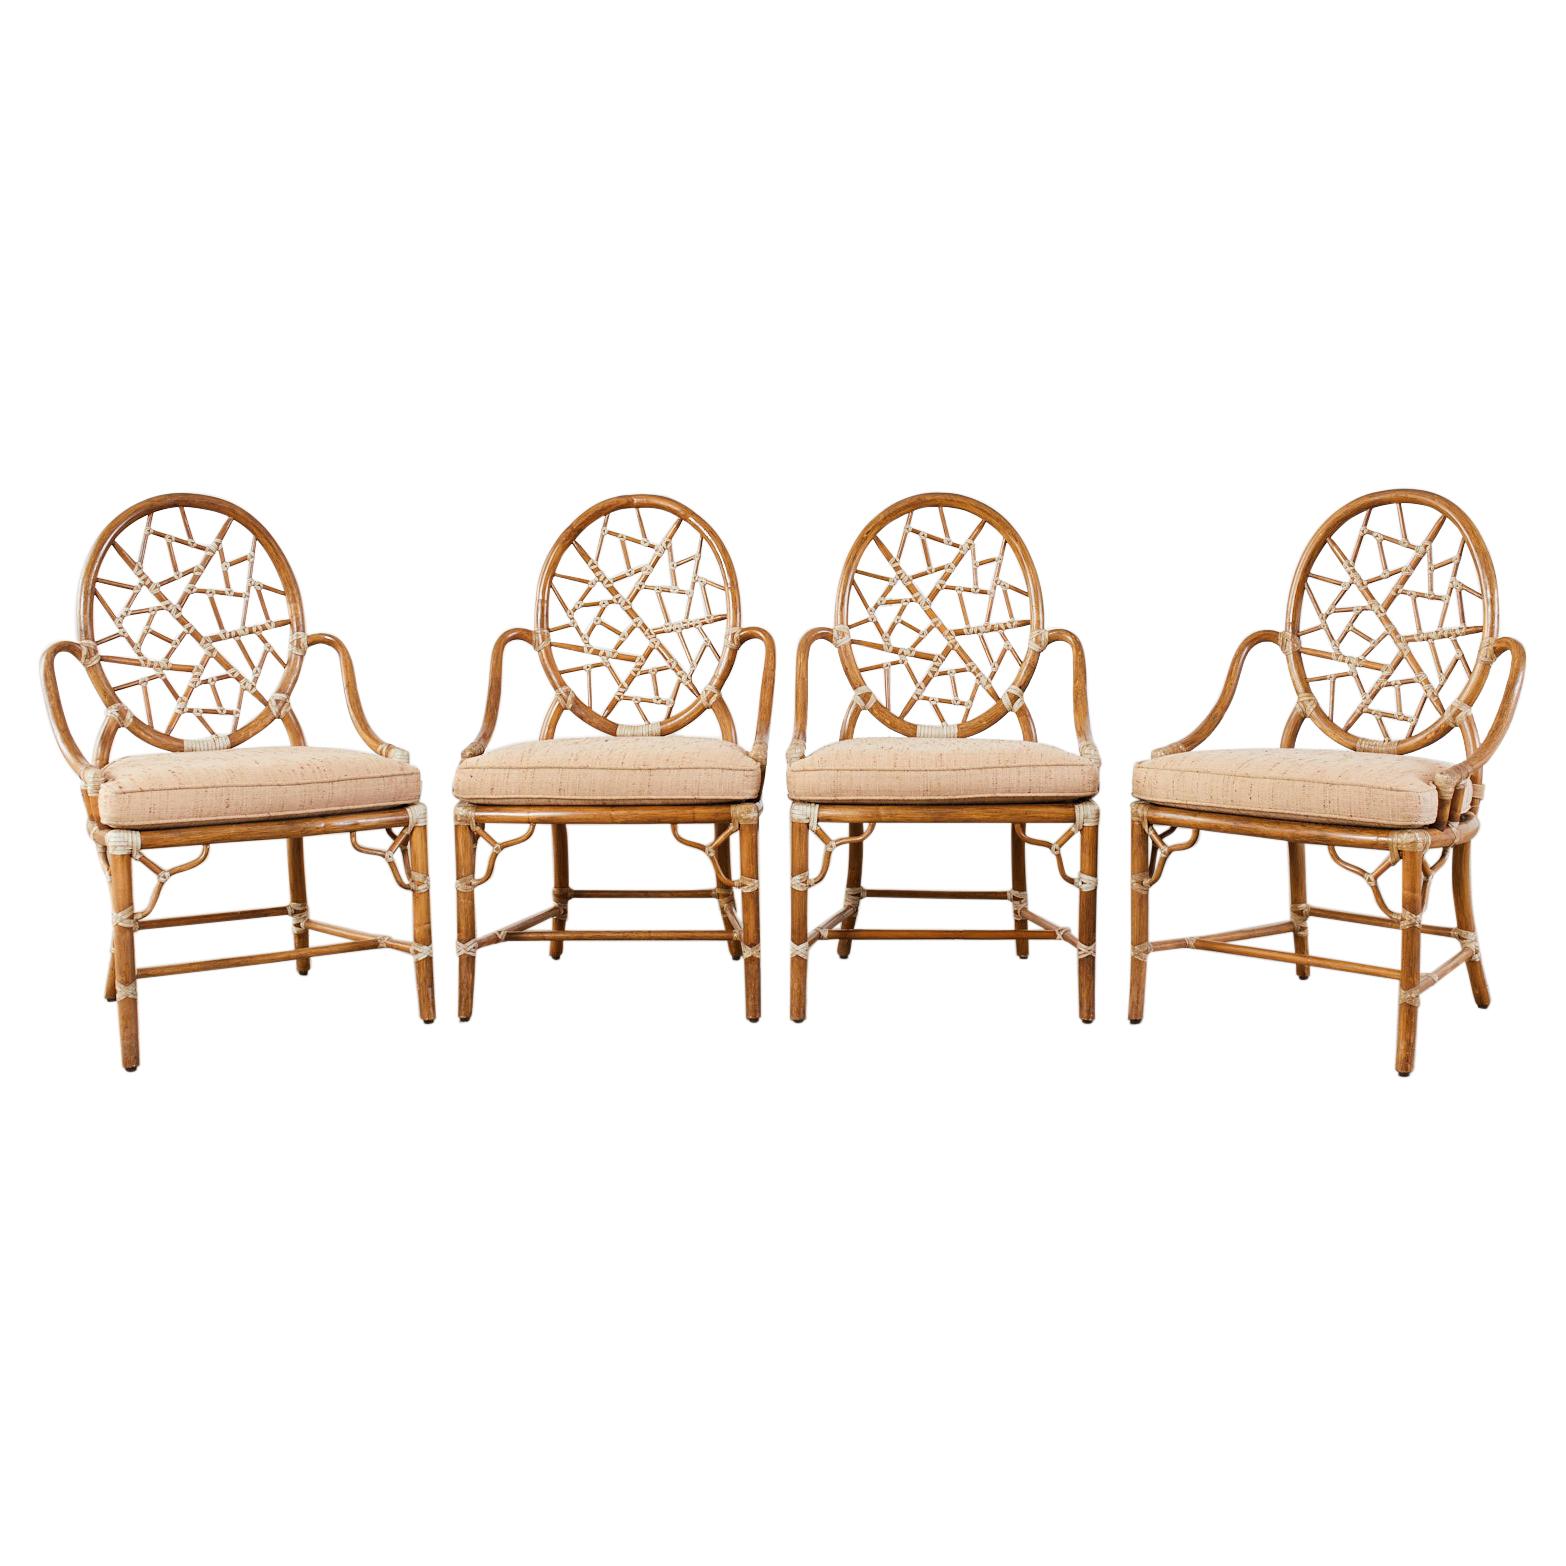 Set of Four McGuire Cracked Ice Rattan Cane Dining Chairs